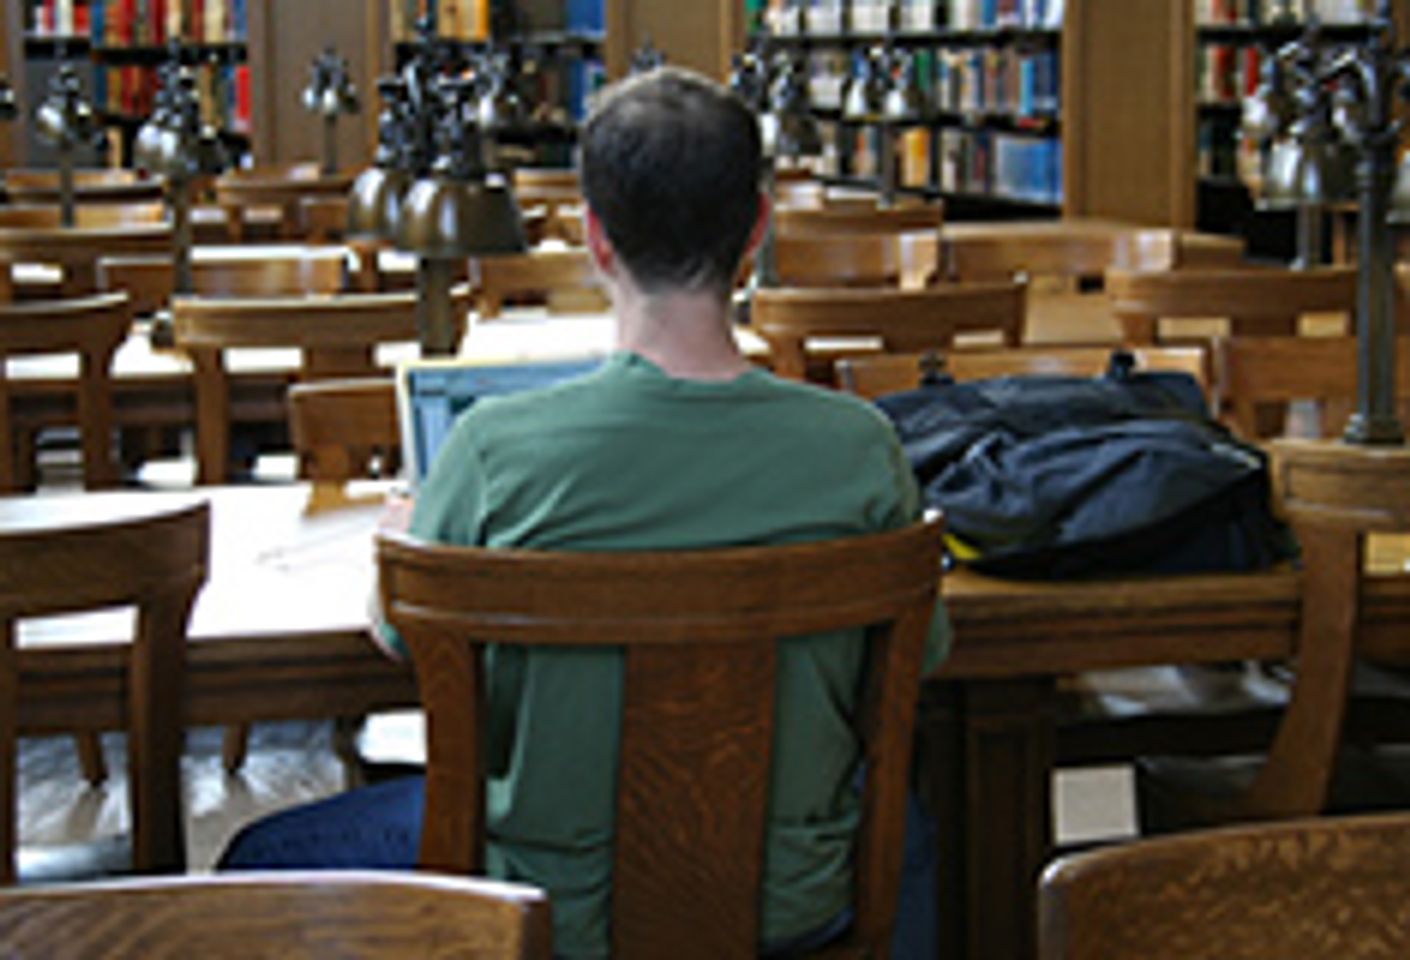 Dallas to Discuss Issue of Internet Porn in Libraries